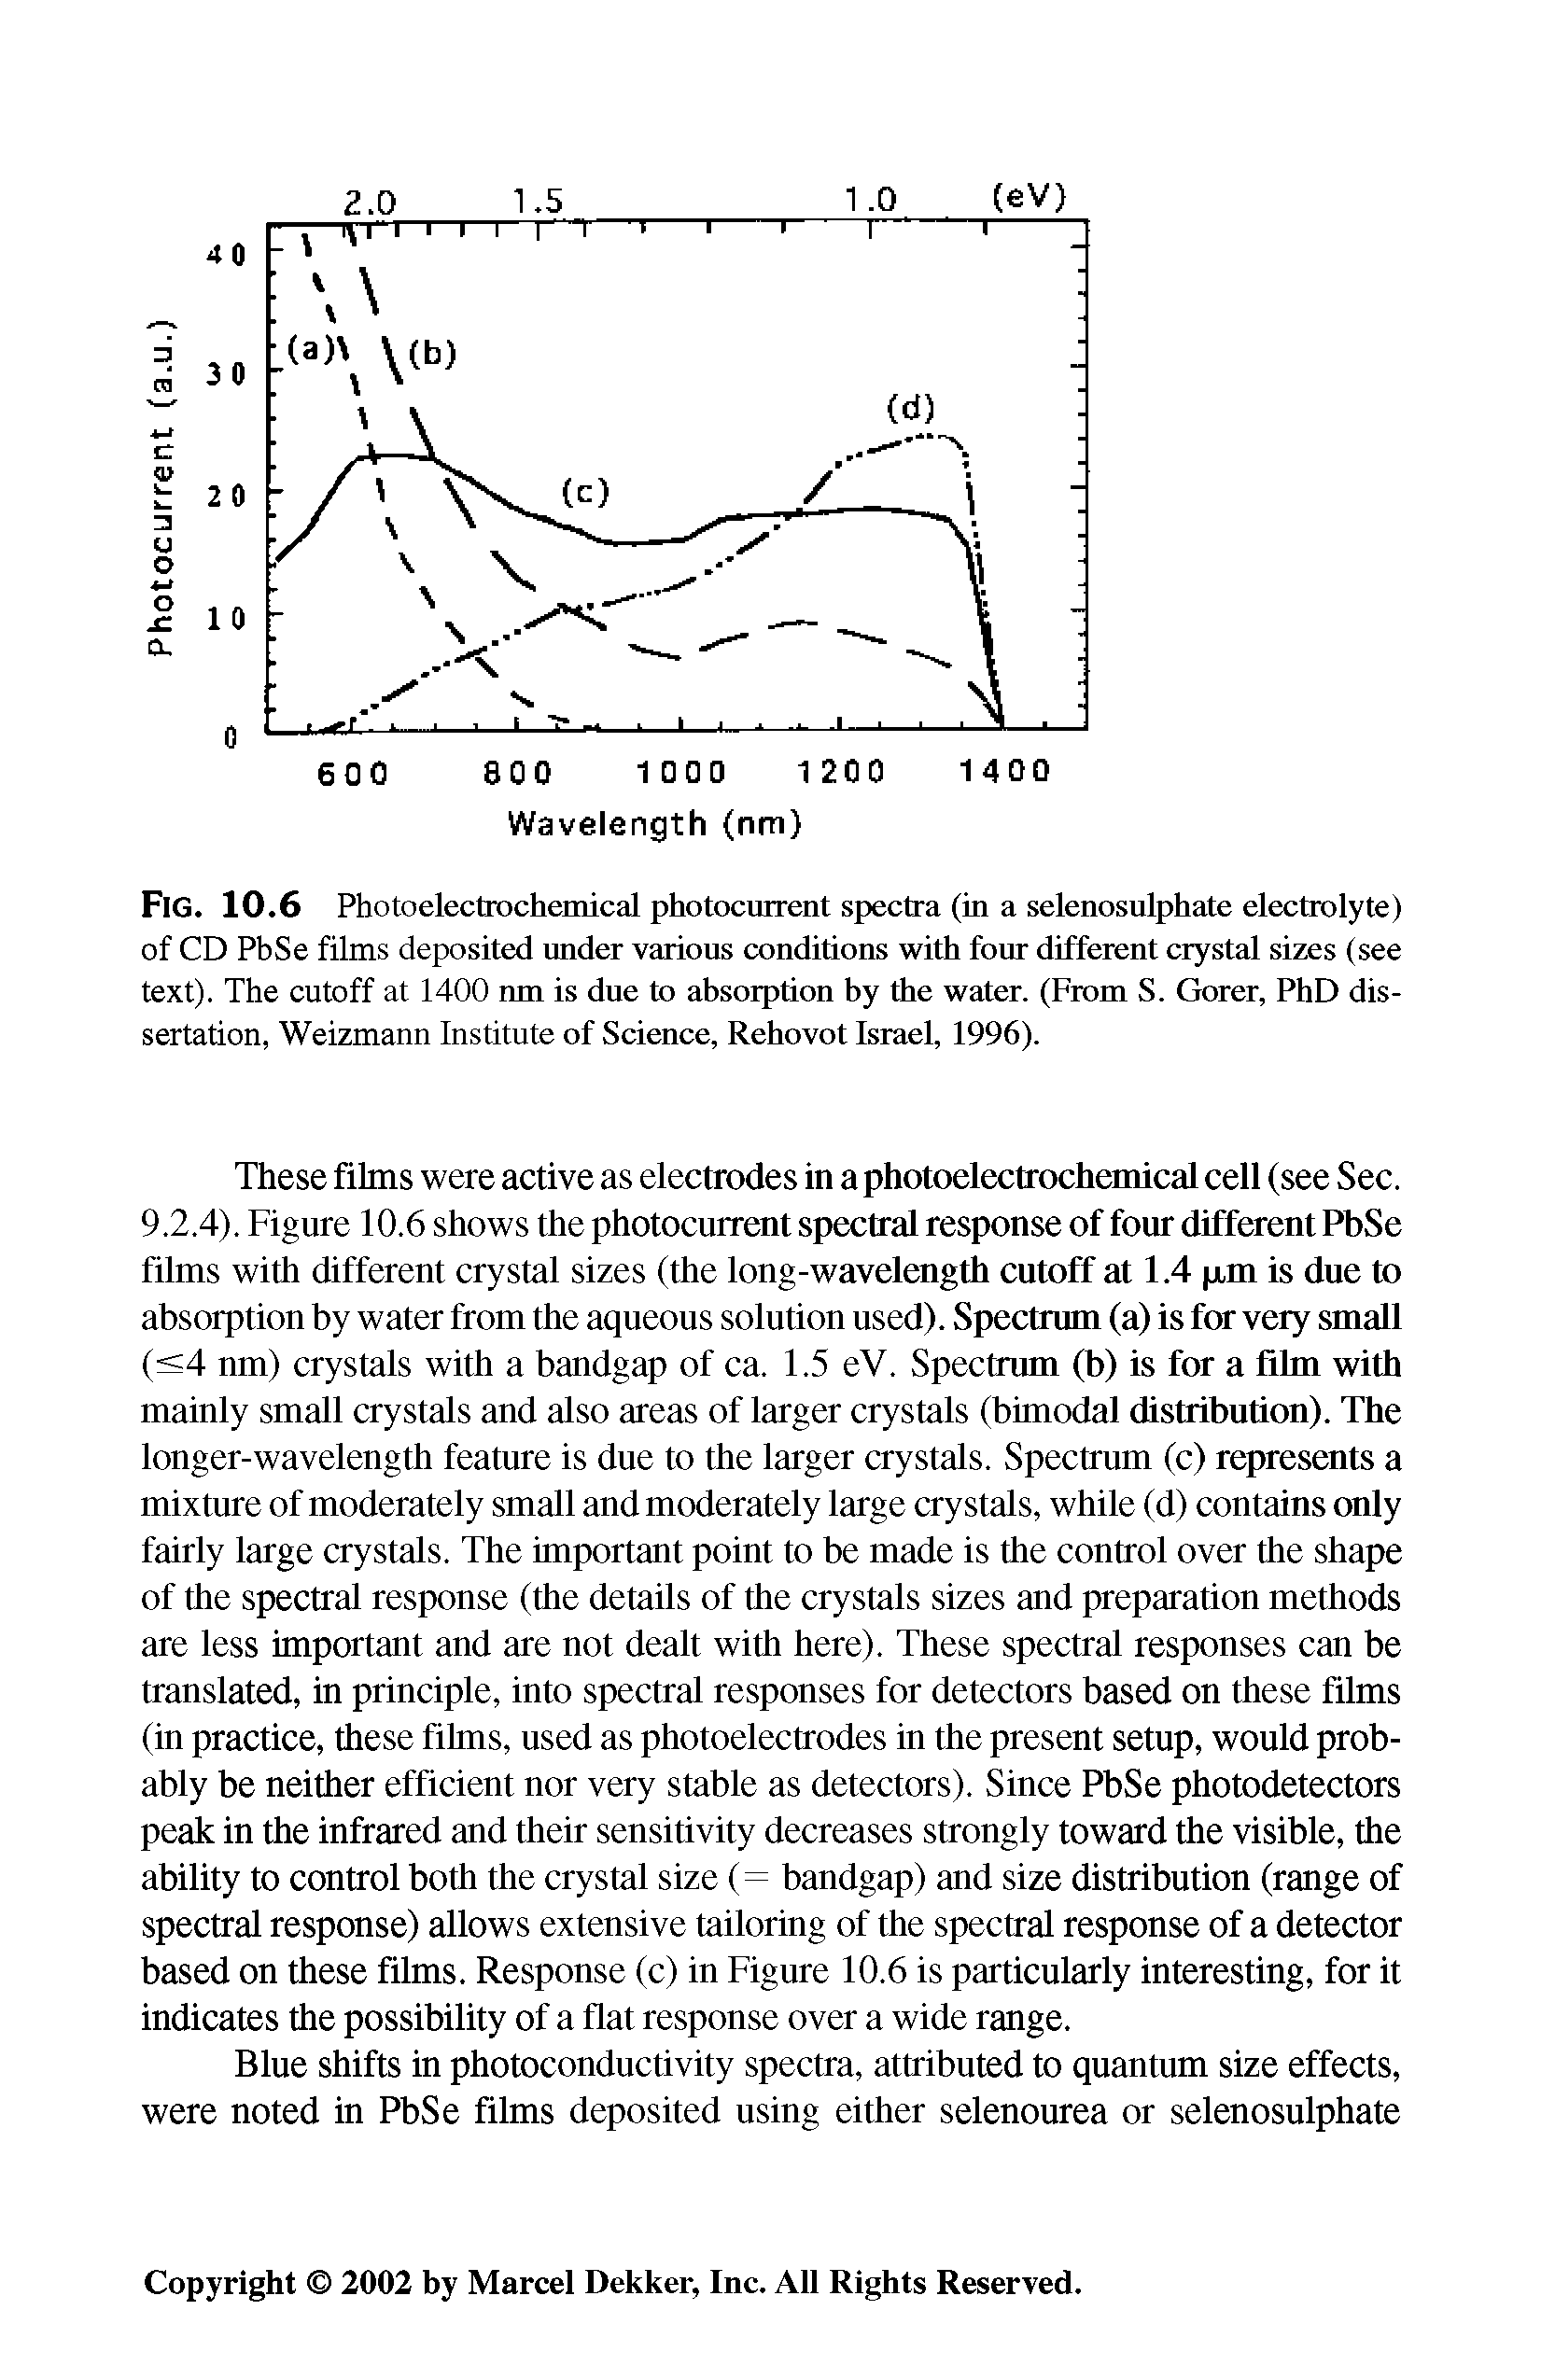 Fig. 10.6 Photoelectrochemical photocurrent spectra (in a selenosulphate electrolyte) of CD PbSe films deposited under various conditions with four different crystal sizes (see text). The cutoff at 1400 run is due to absorption by the water. (From S. Gorer, PhD dissertation, Weizmann Institute of Science, Rehovot Israel, 1996).